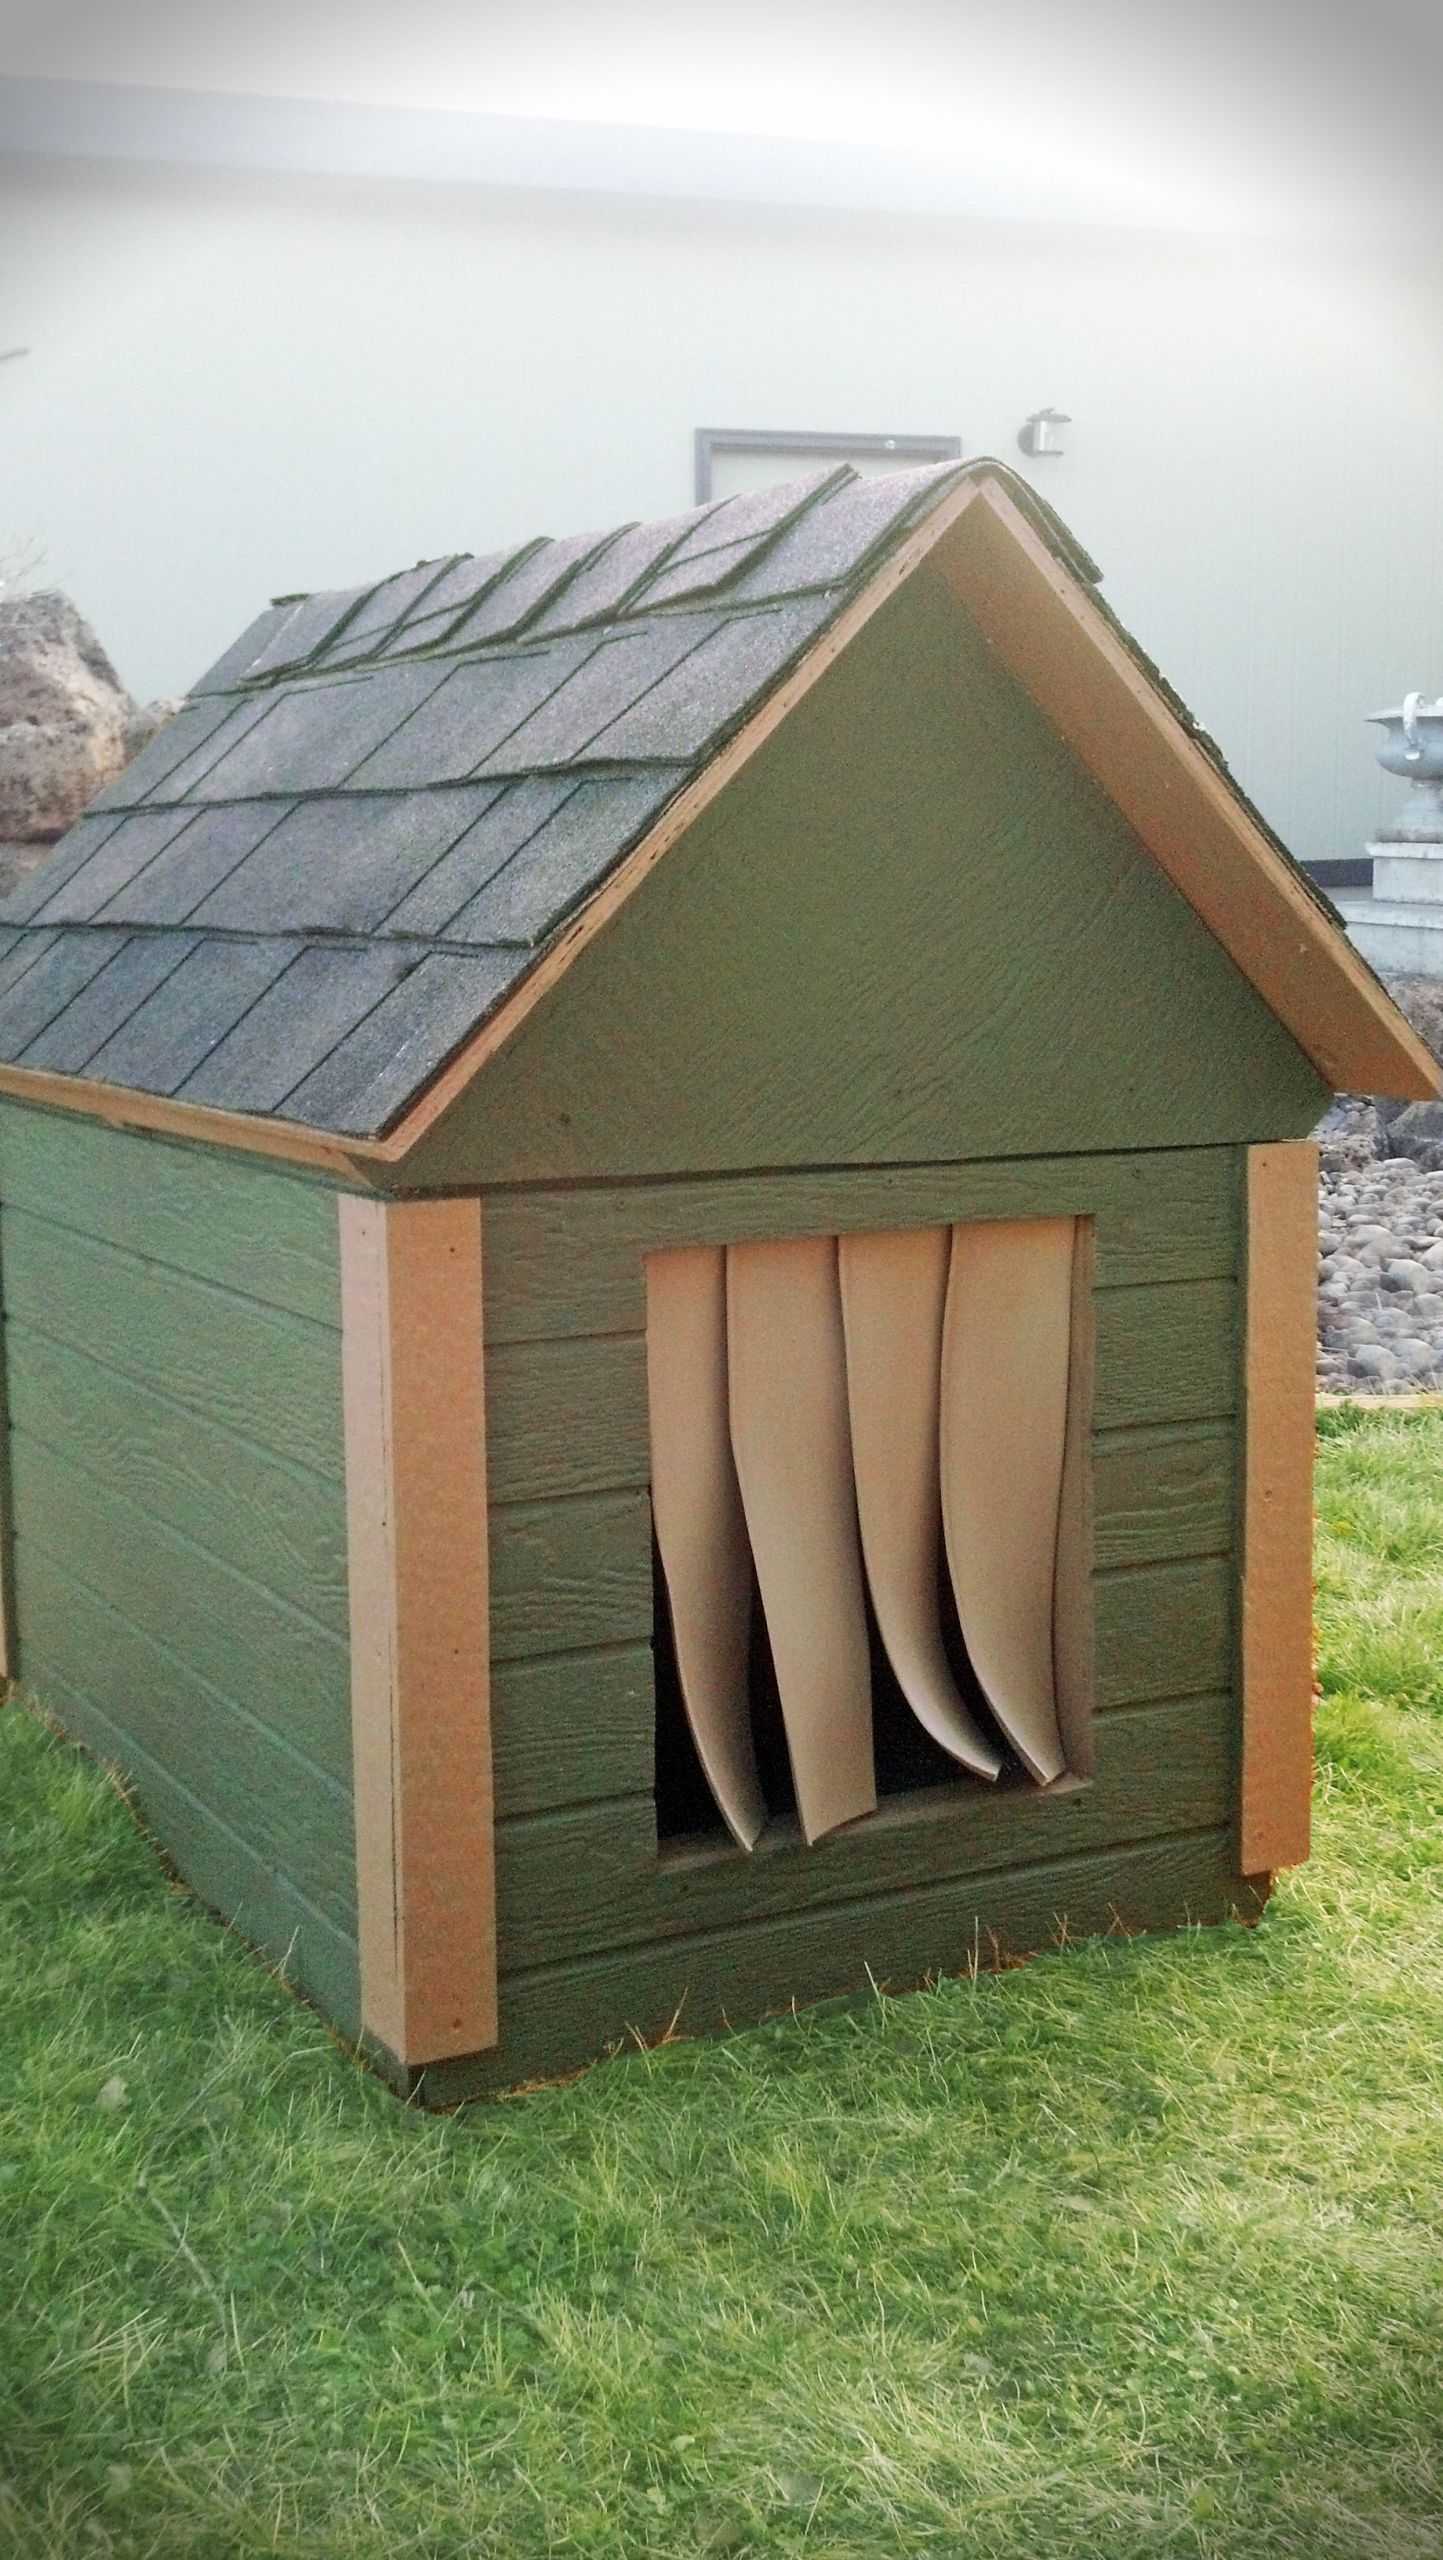 DIY Winter Dog House
 Cozy insulated dog house to keep your best friend warm in